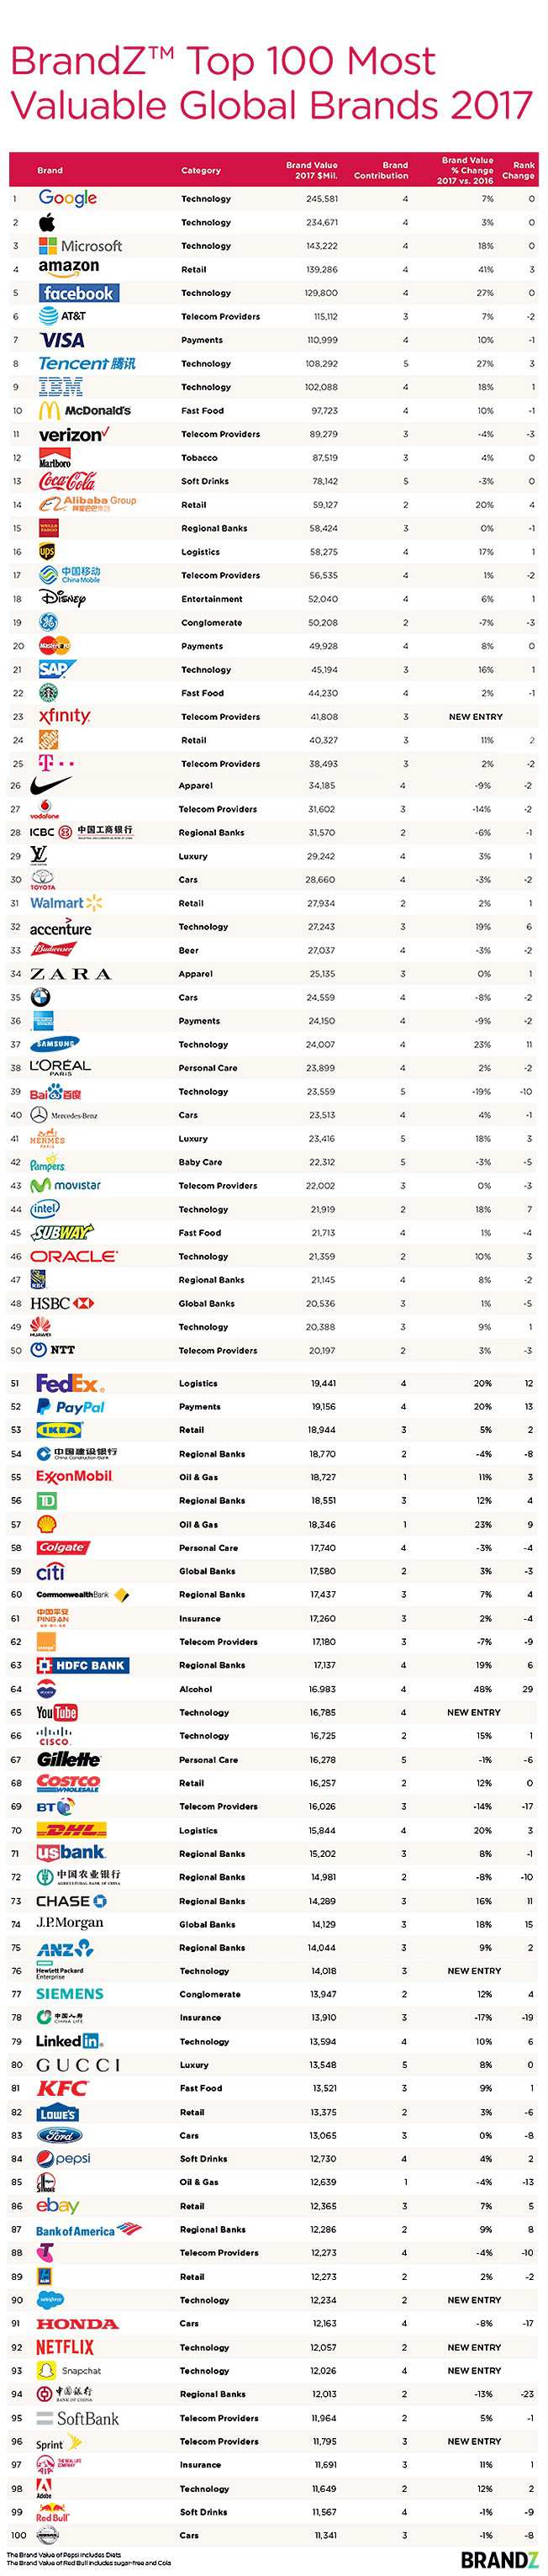 100-most-valuable-global-brands-2017